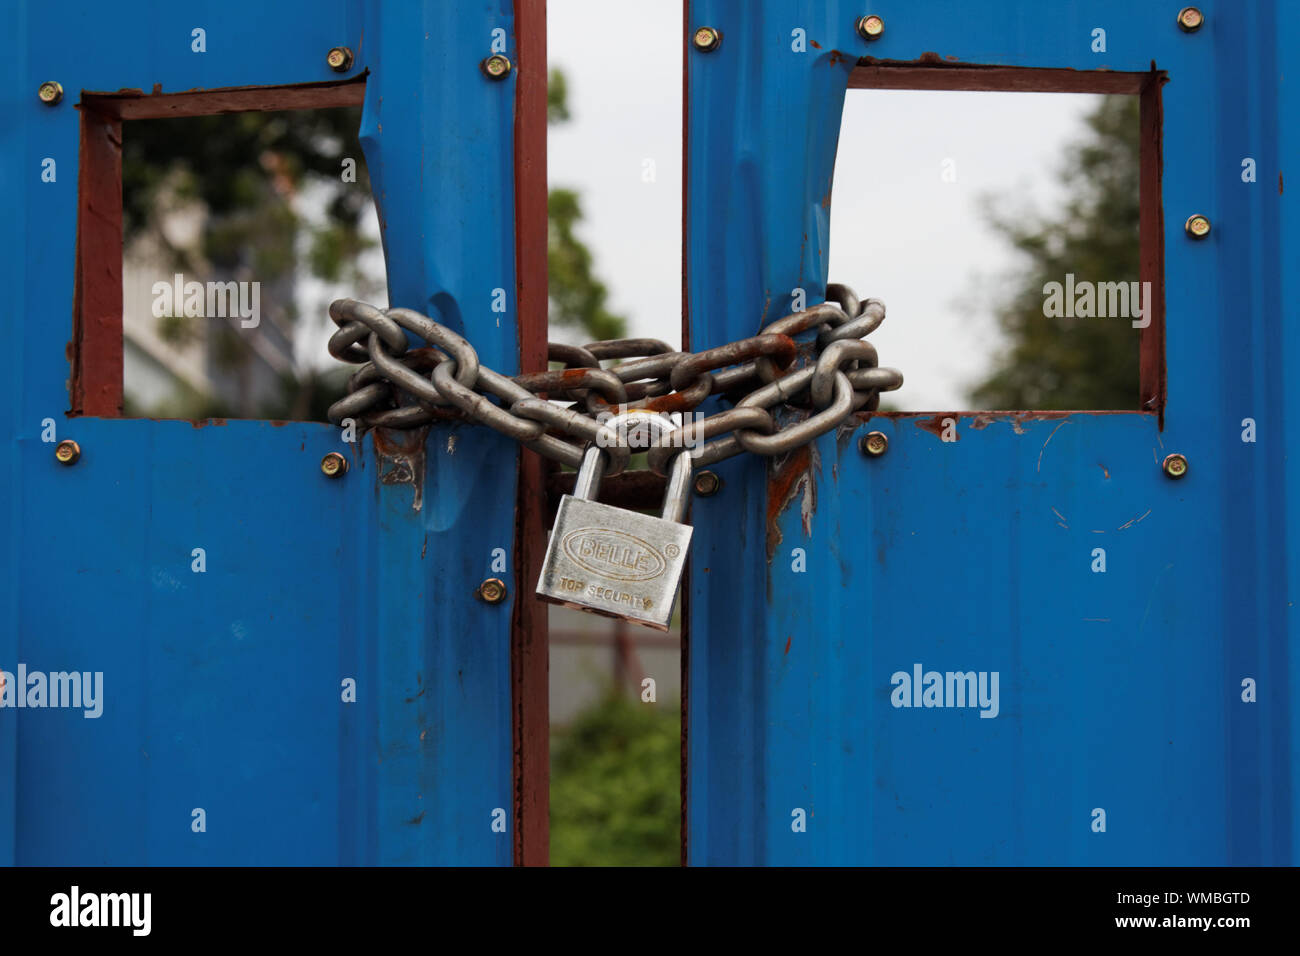 Close-up Of Locked Blue Metal Gate Stock Photo